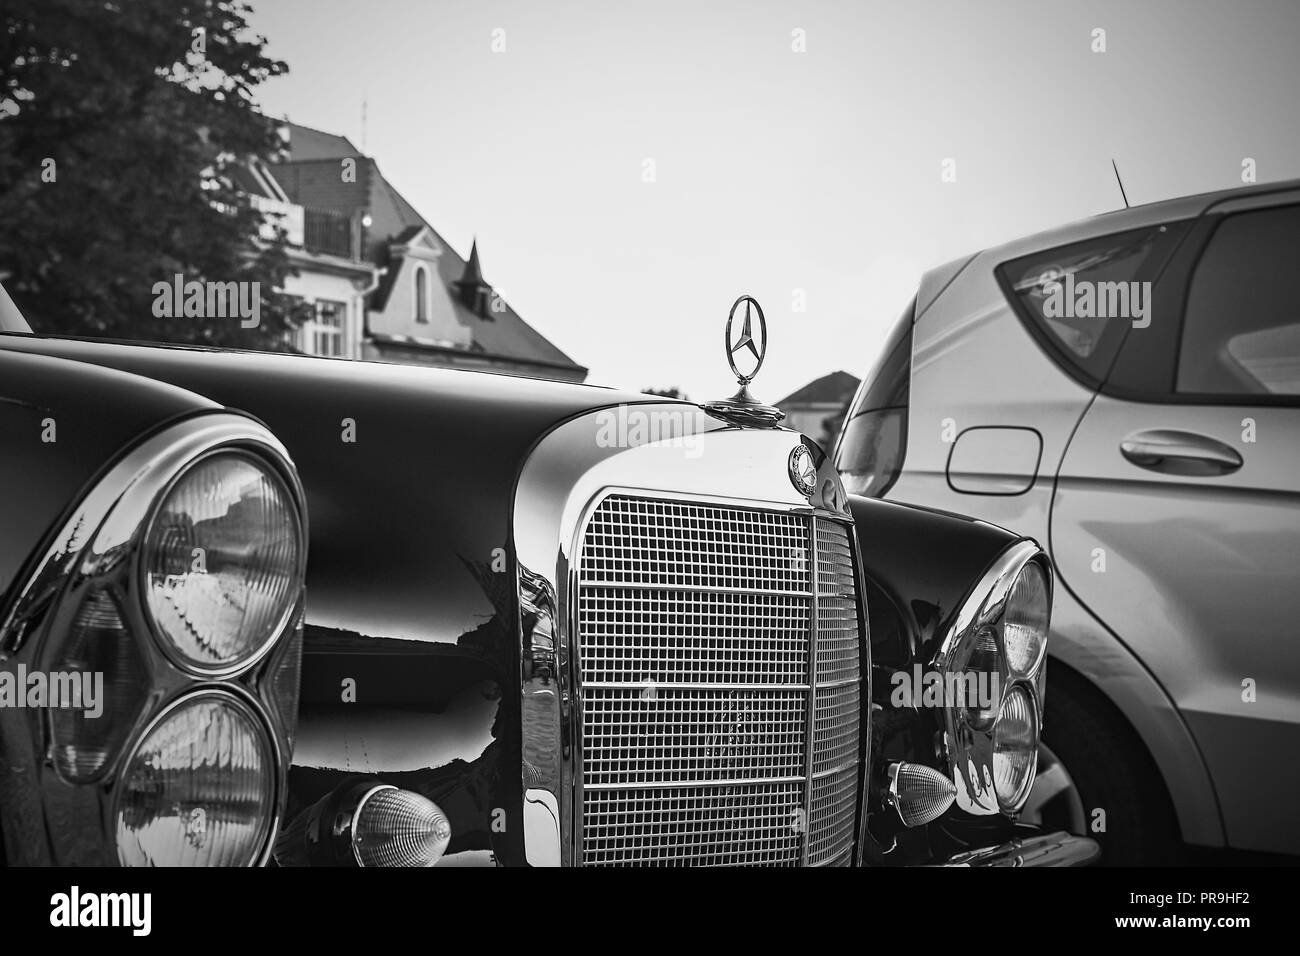 Mercedes Benz logo on a black vintage car. Mercedes-Benz is a German automobile producer. The brand is used for luxury automobiles, buses, coaches and trucks. Black white filter. Stock Photo